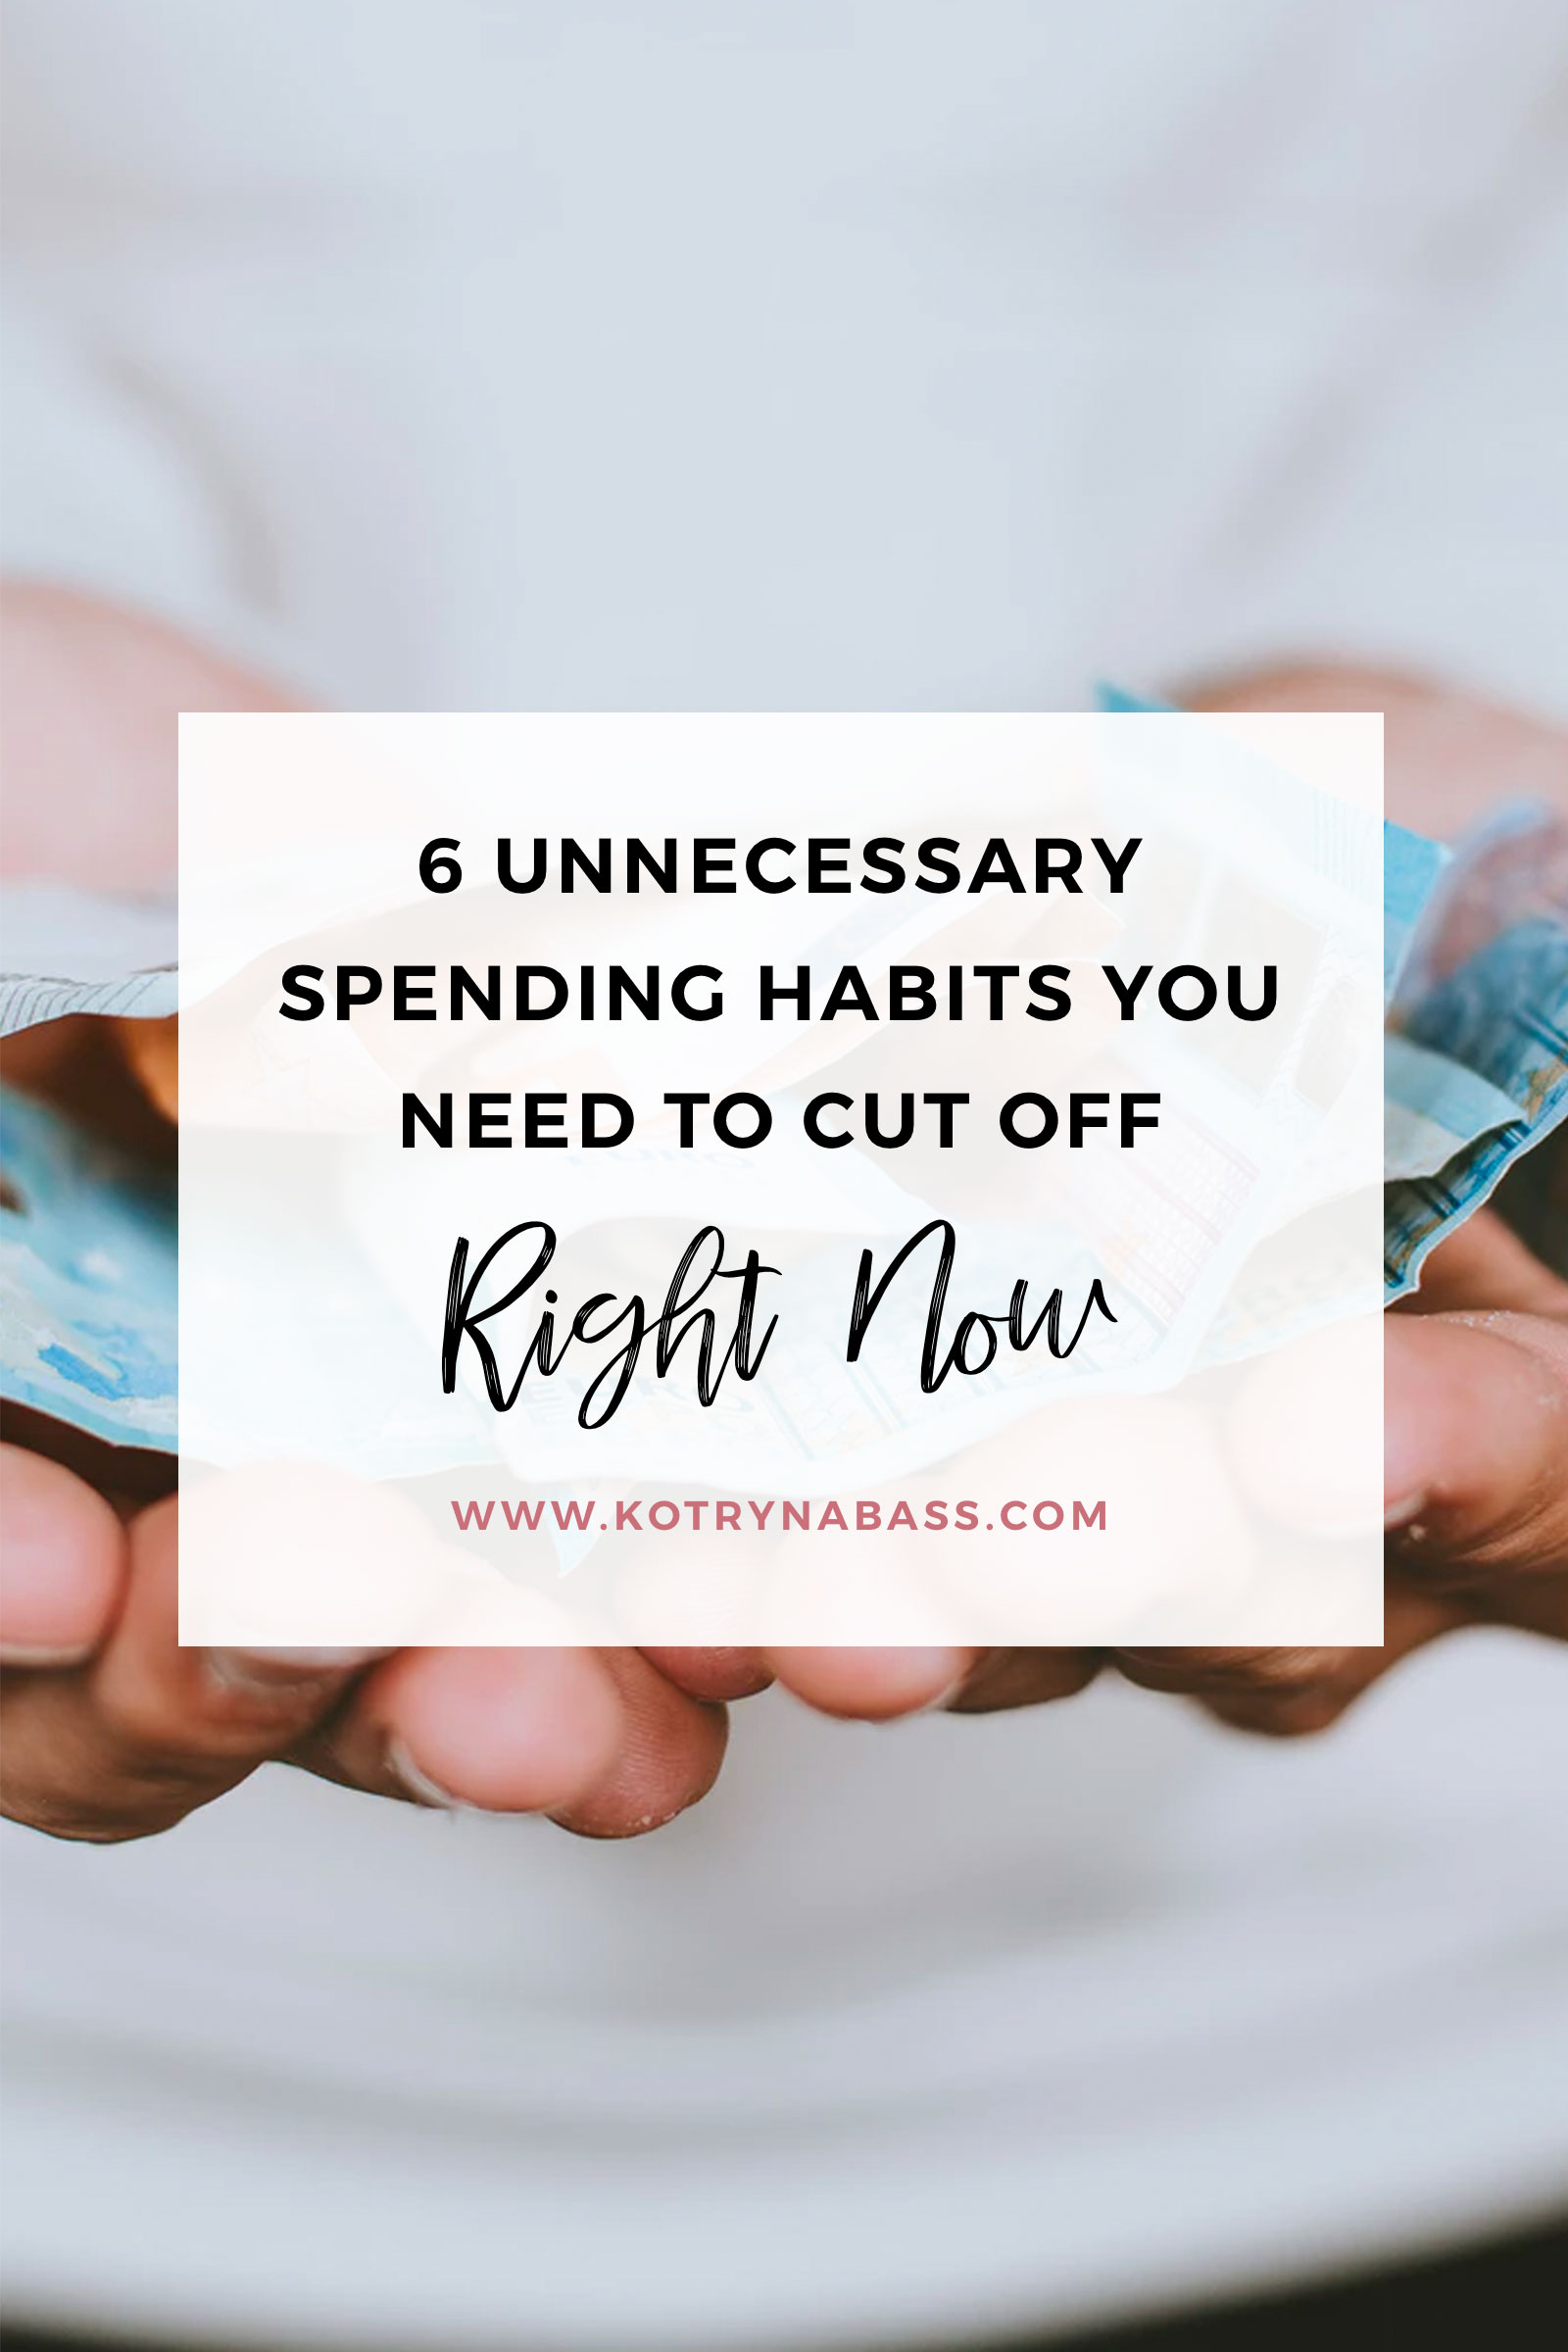 As a brand new homeowner, I want to go deep into the journey of getting to know my money. I'm turning 27 next month which kind of makes me feel like I should start introducing myself as an adult and the one thing adults seems to have mostly figured out is their income. Let's start with discussing those unnecessary spending habits you need to cut off right now.